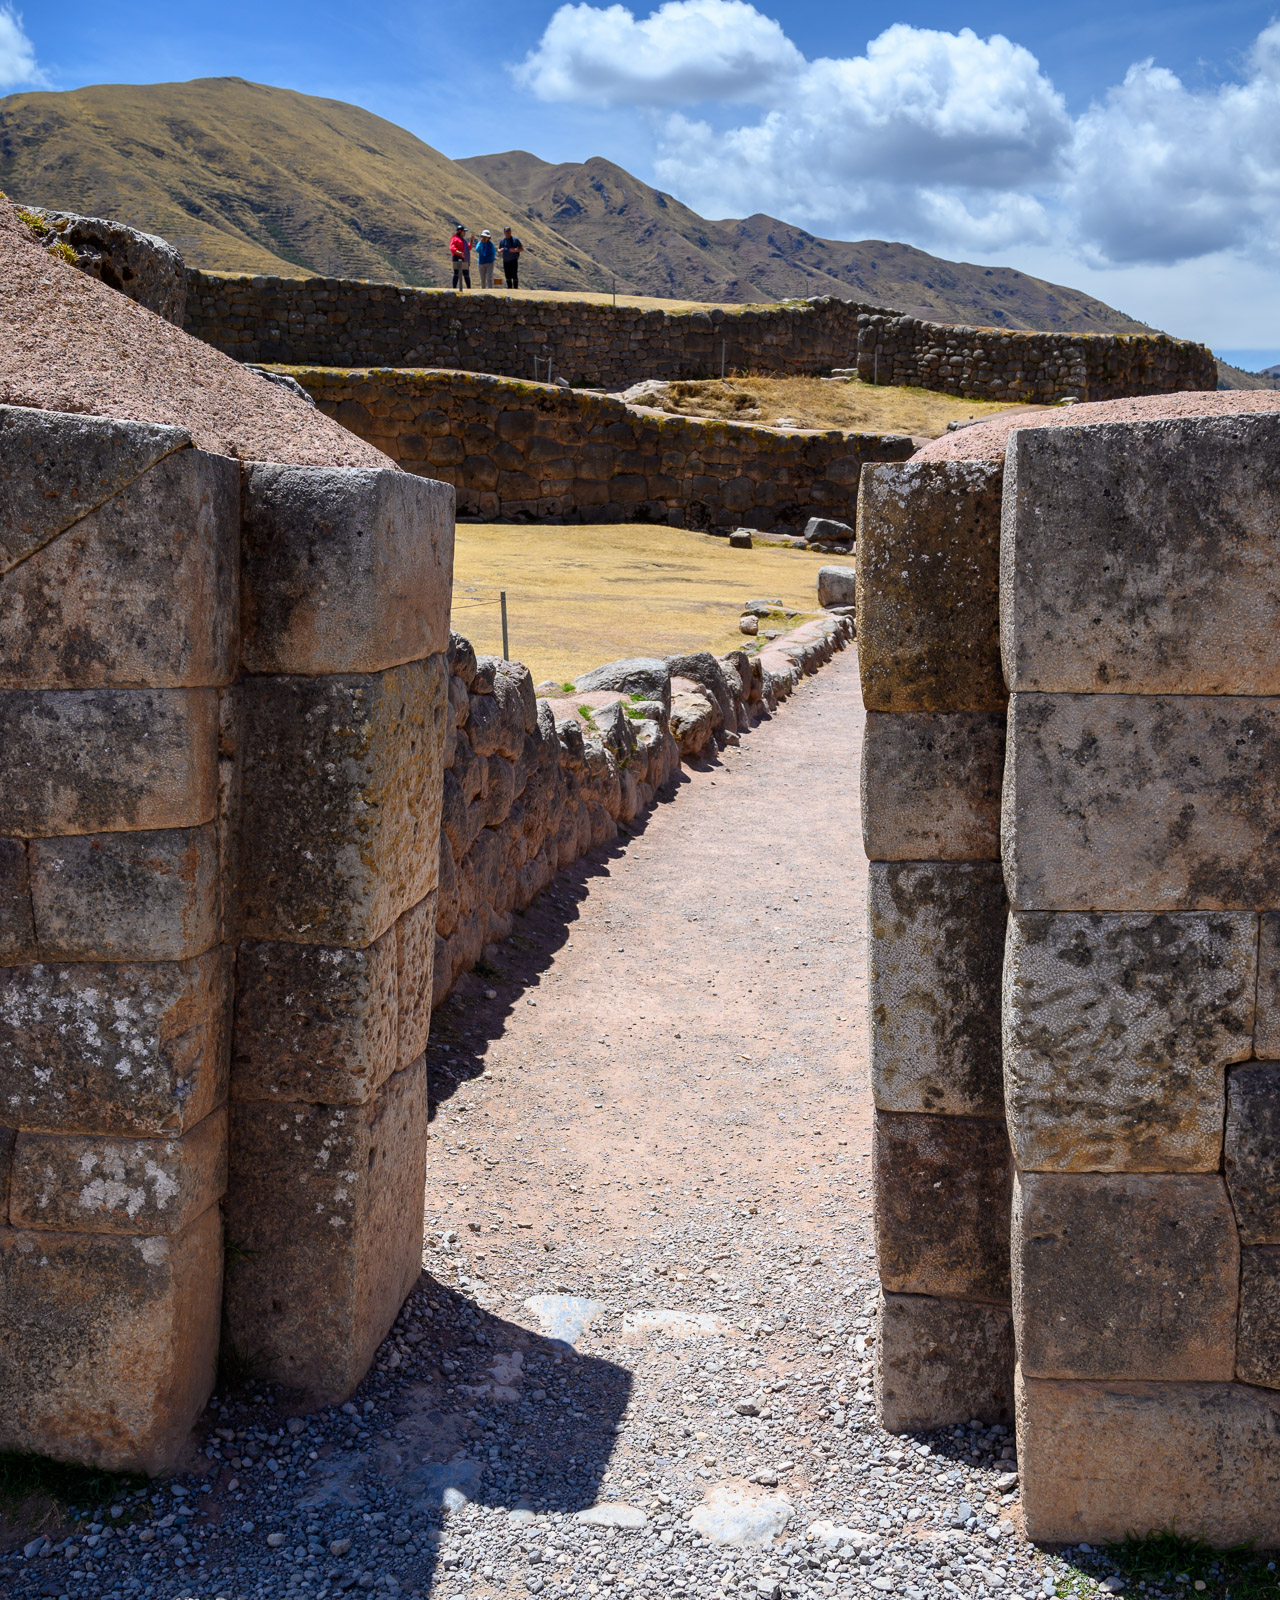 View through a stone gateway into the Red Fortress ruins outside Cusco